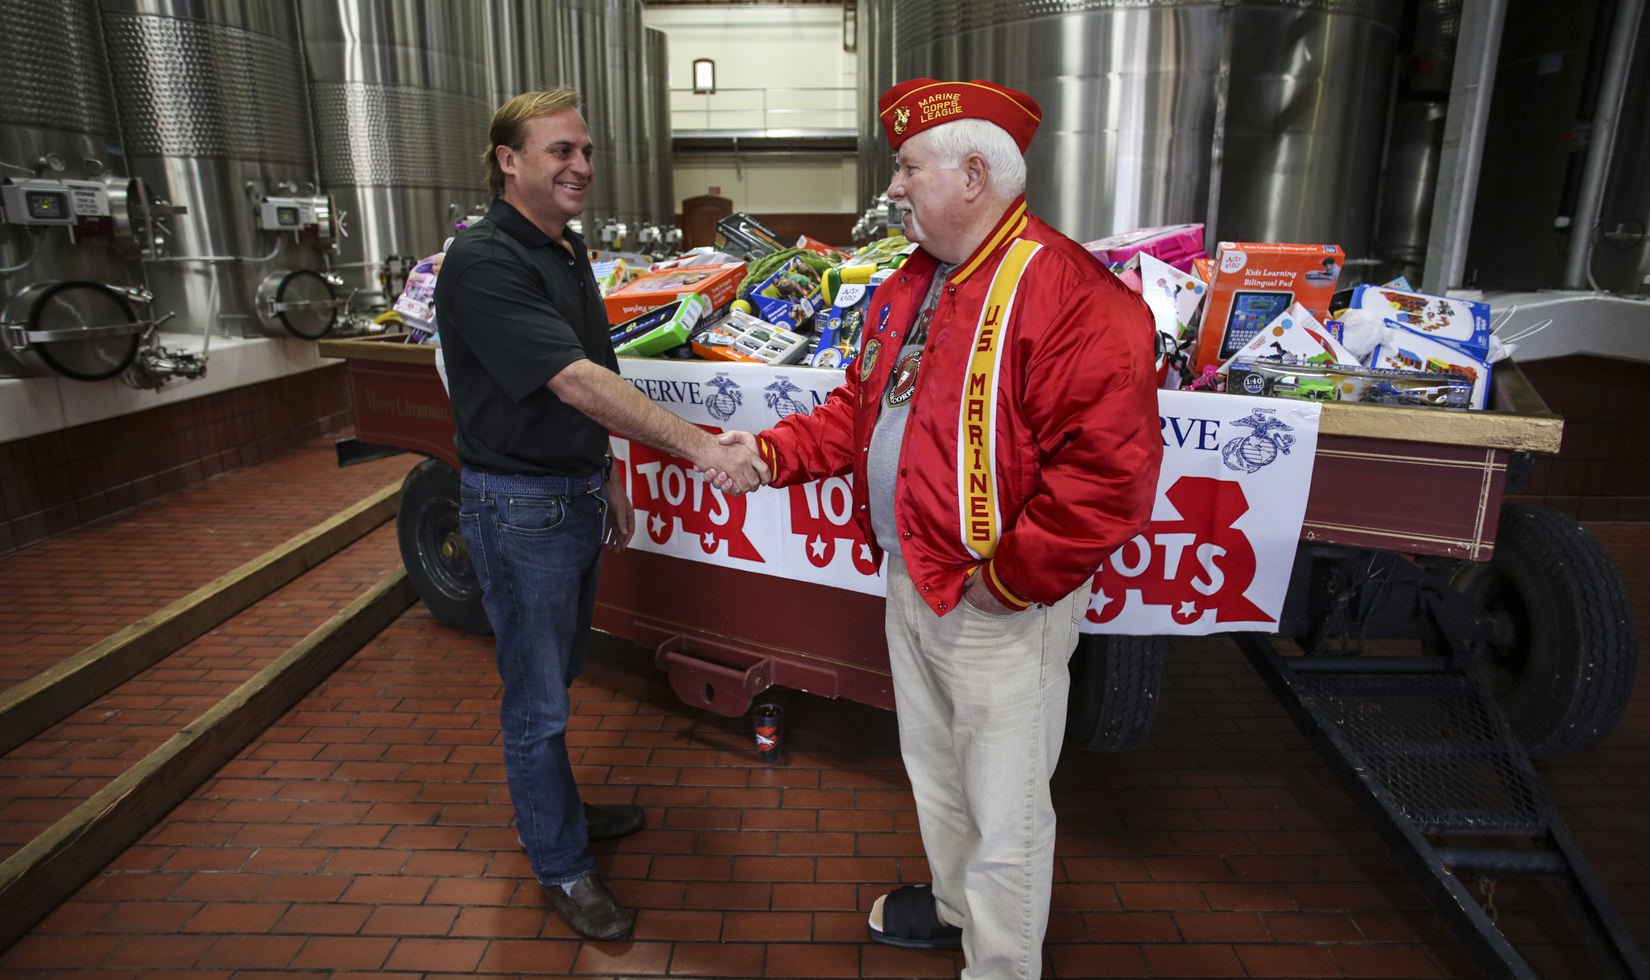 John Jordan, CEO and proprietor of Jordan Winery shaking hands with a US Marine Crop member in front of a sleigh full of toys to be donated to Toys for Tots